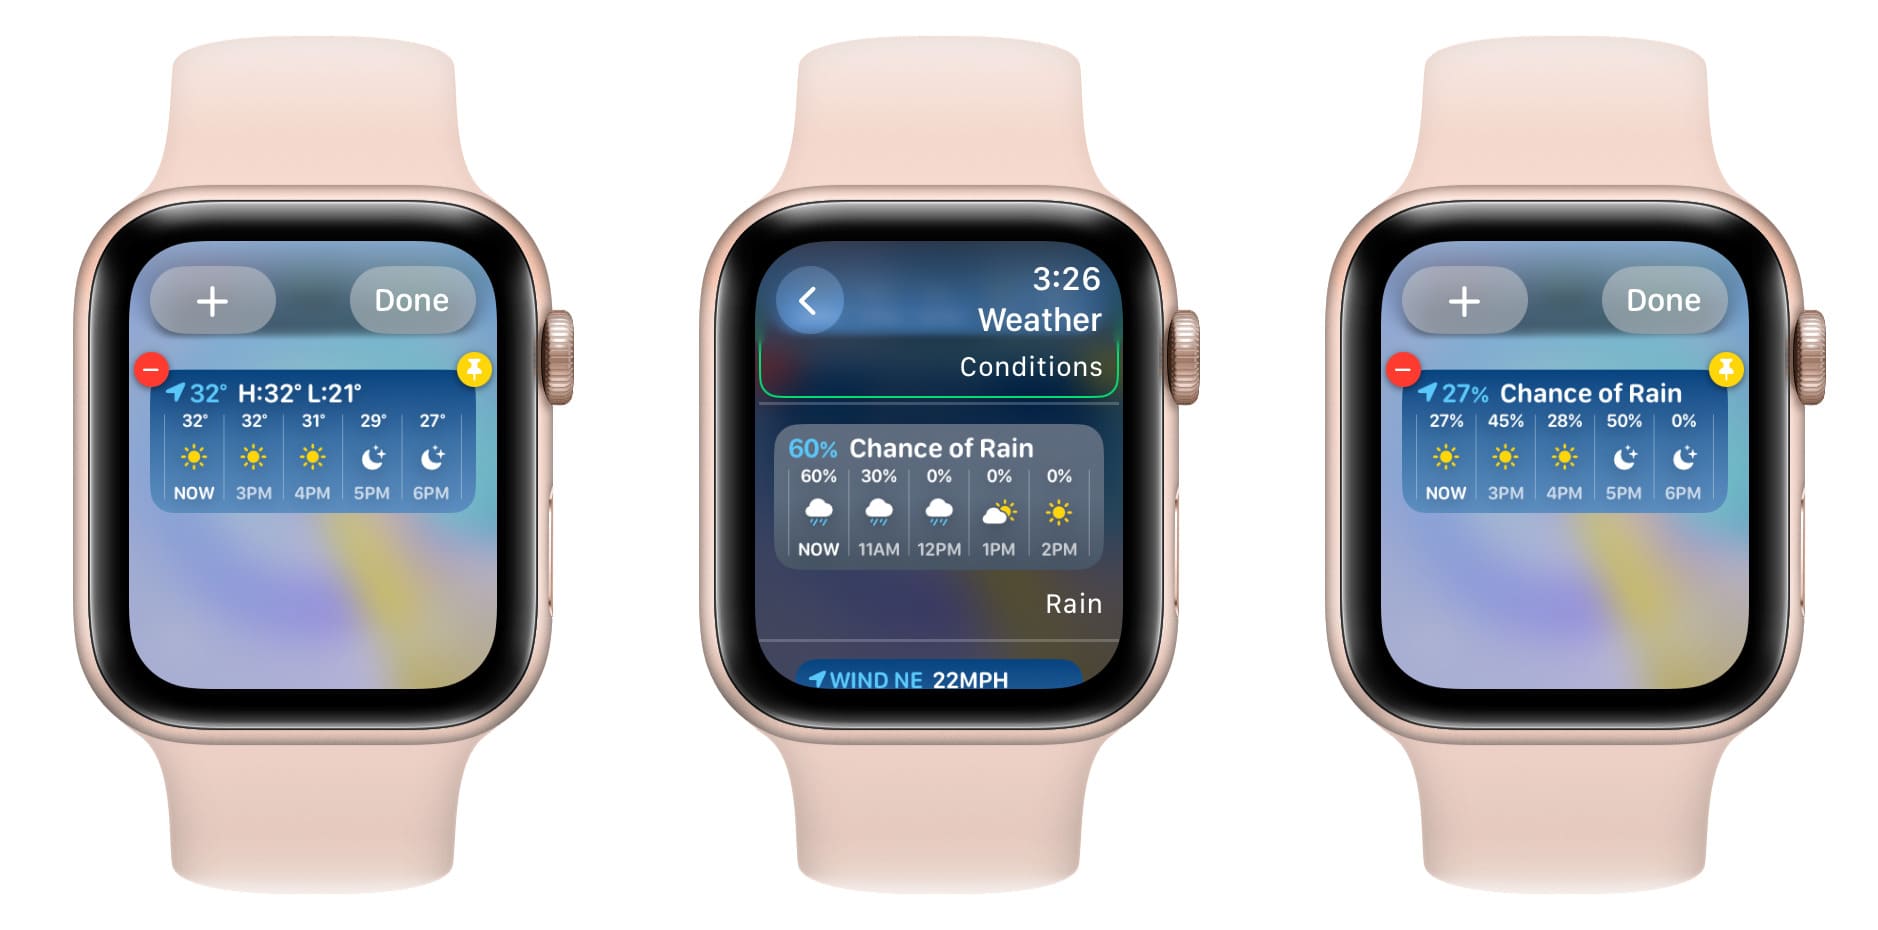 Select another widget for an existing app widget on Apple Watch